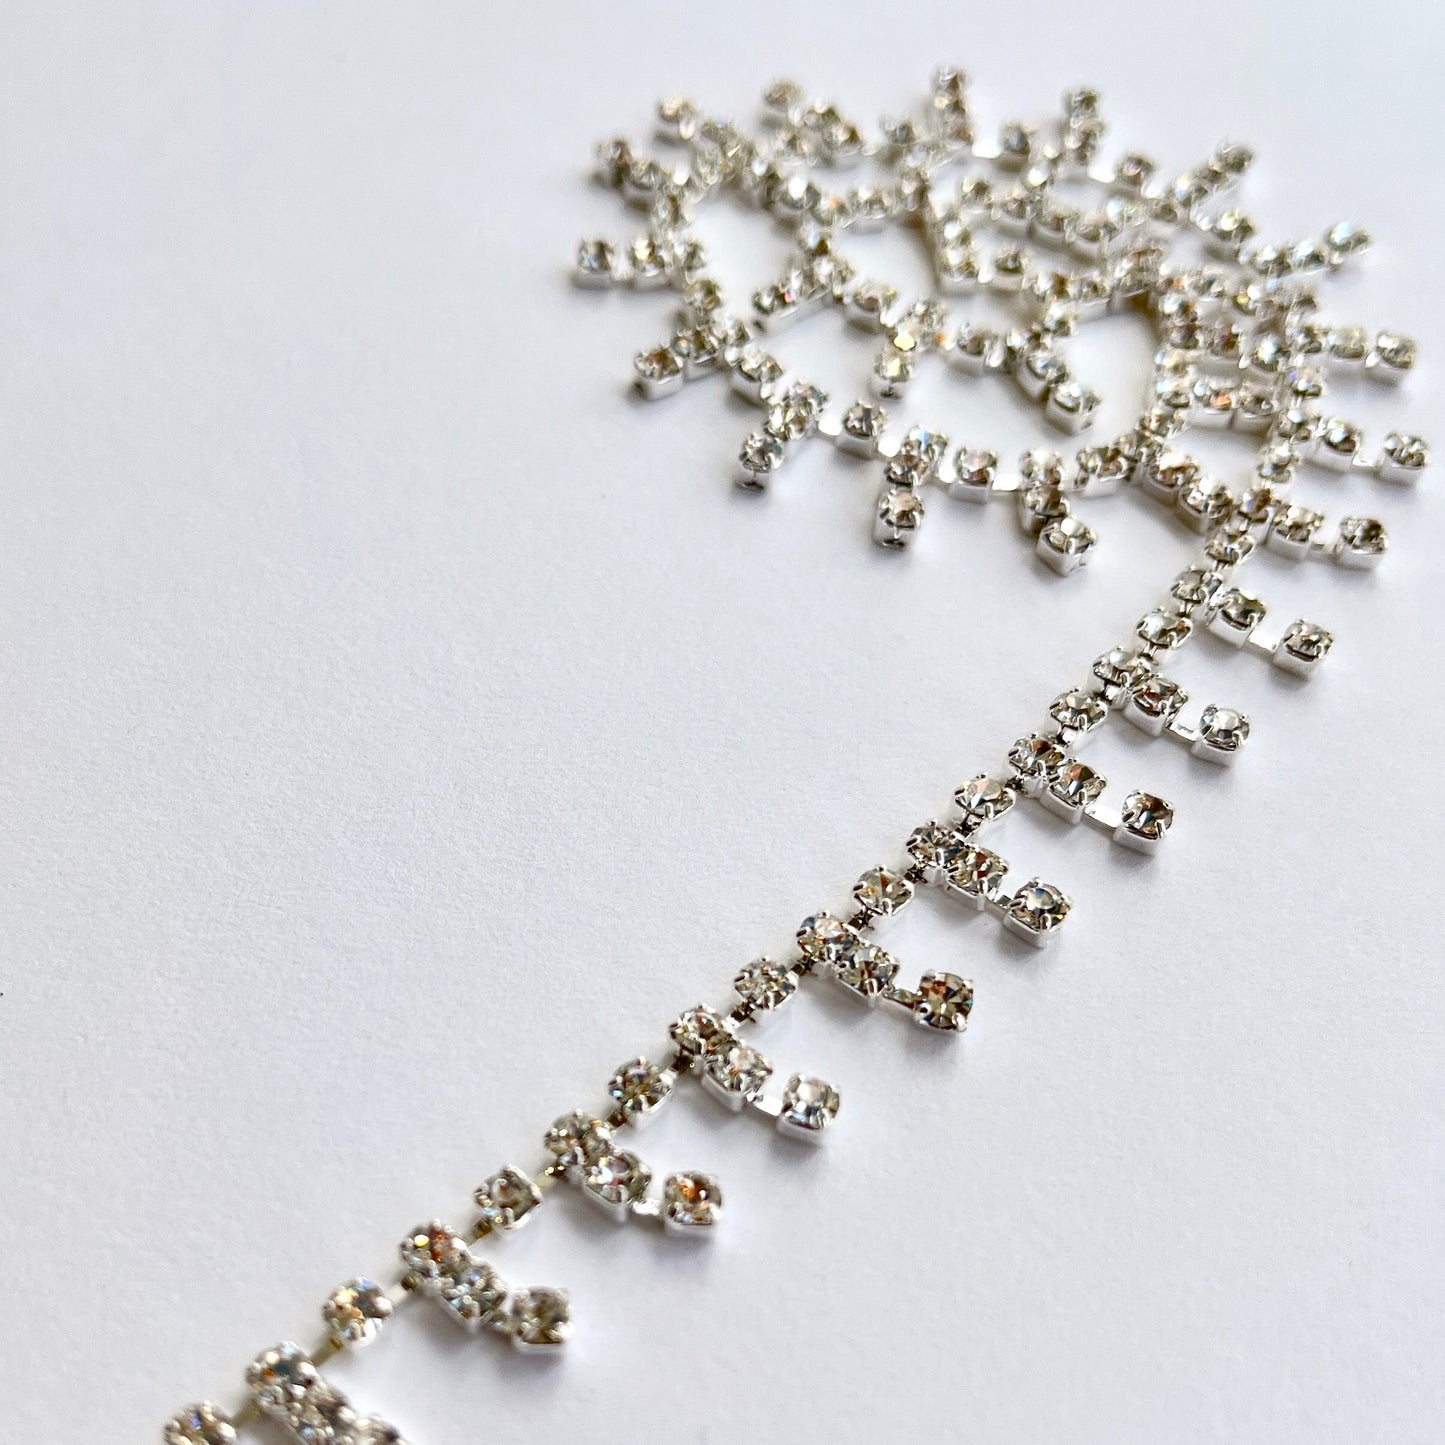 Delicate sparkly rhinestone fringe trim made premium high grade diamanté crystals set in a flexible metal chain casing. Popular for bridal wear, evening wear, crafts, jewellery and headband making.